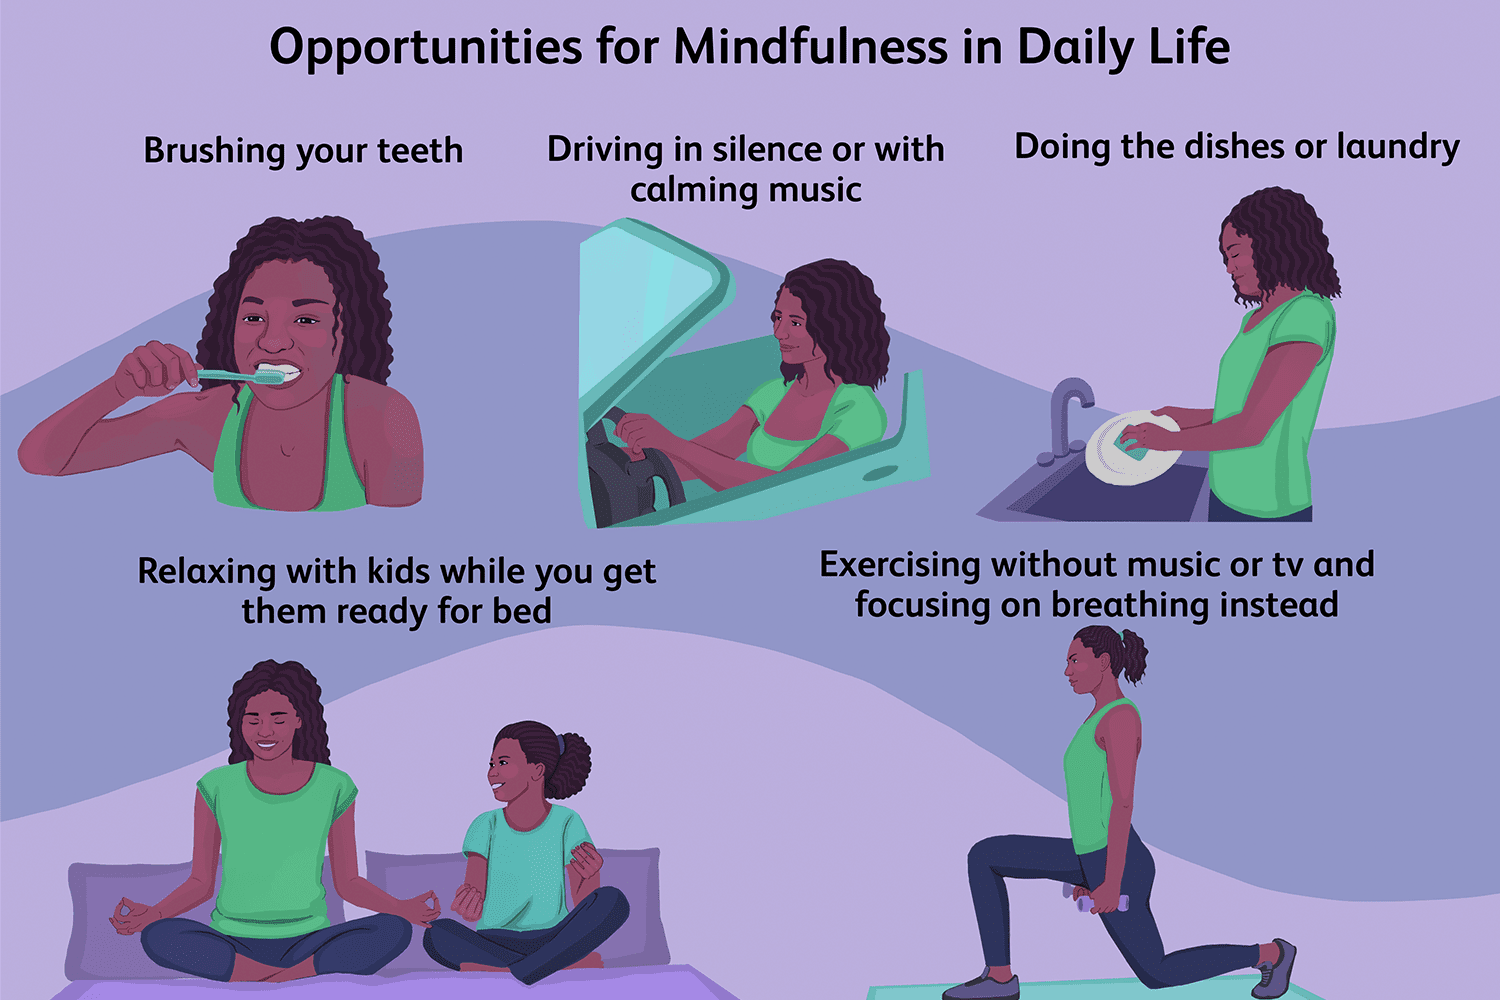 Find opportunities to bring mindfulness into your daily activities